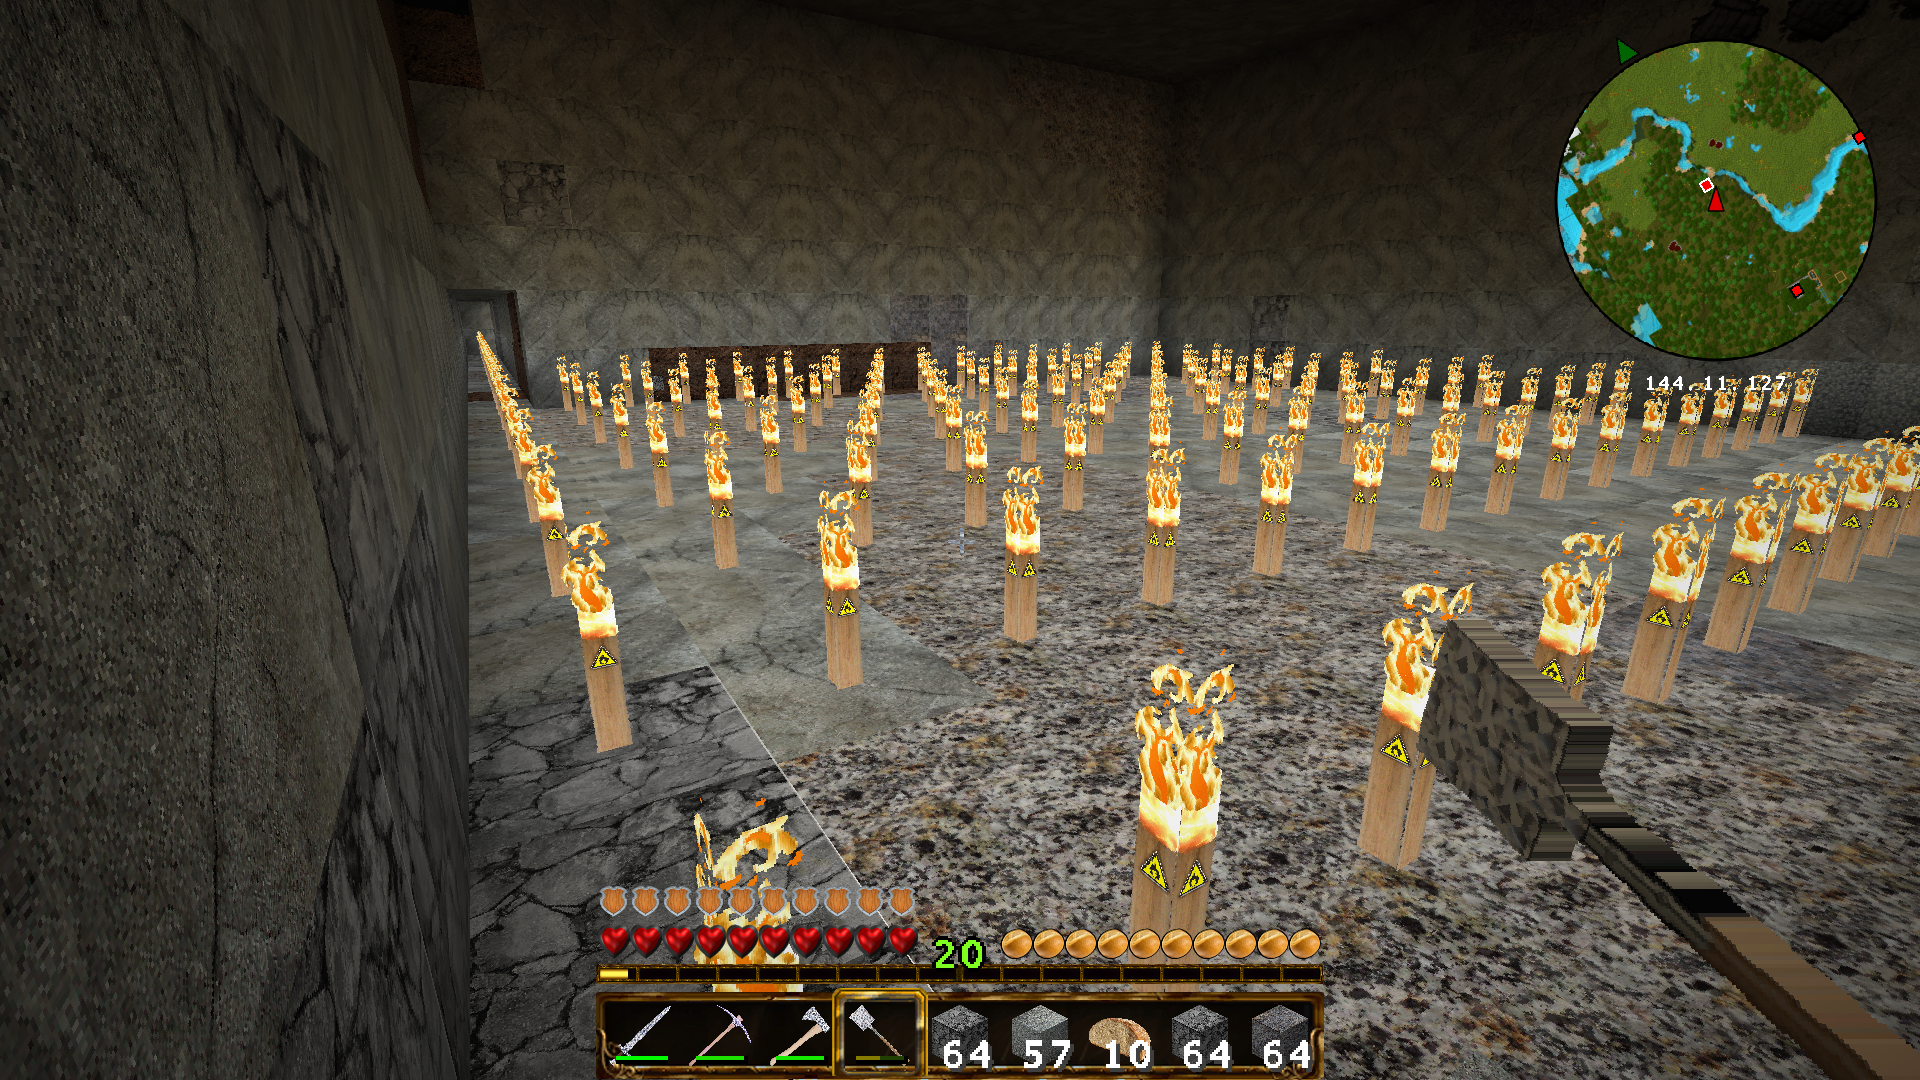 Mobs spawning in an insanely well lit room